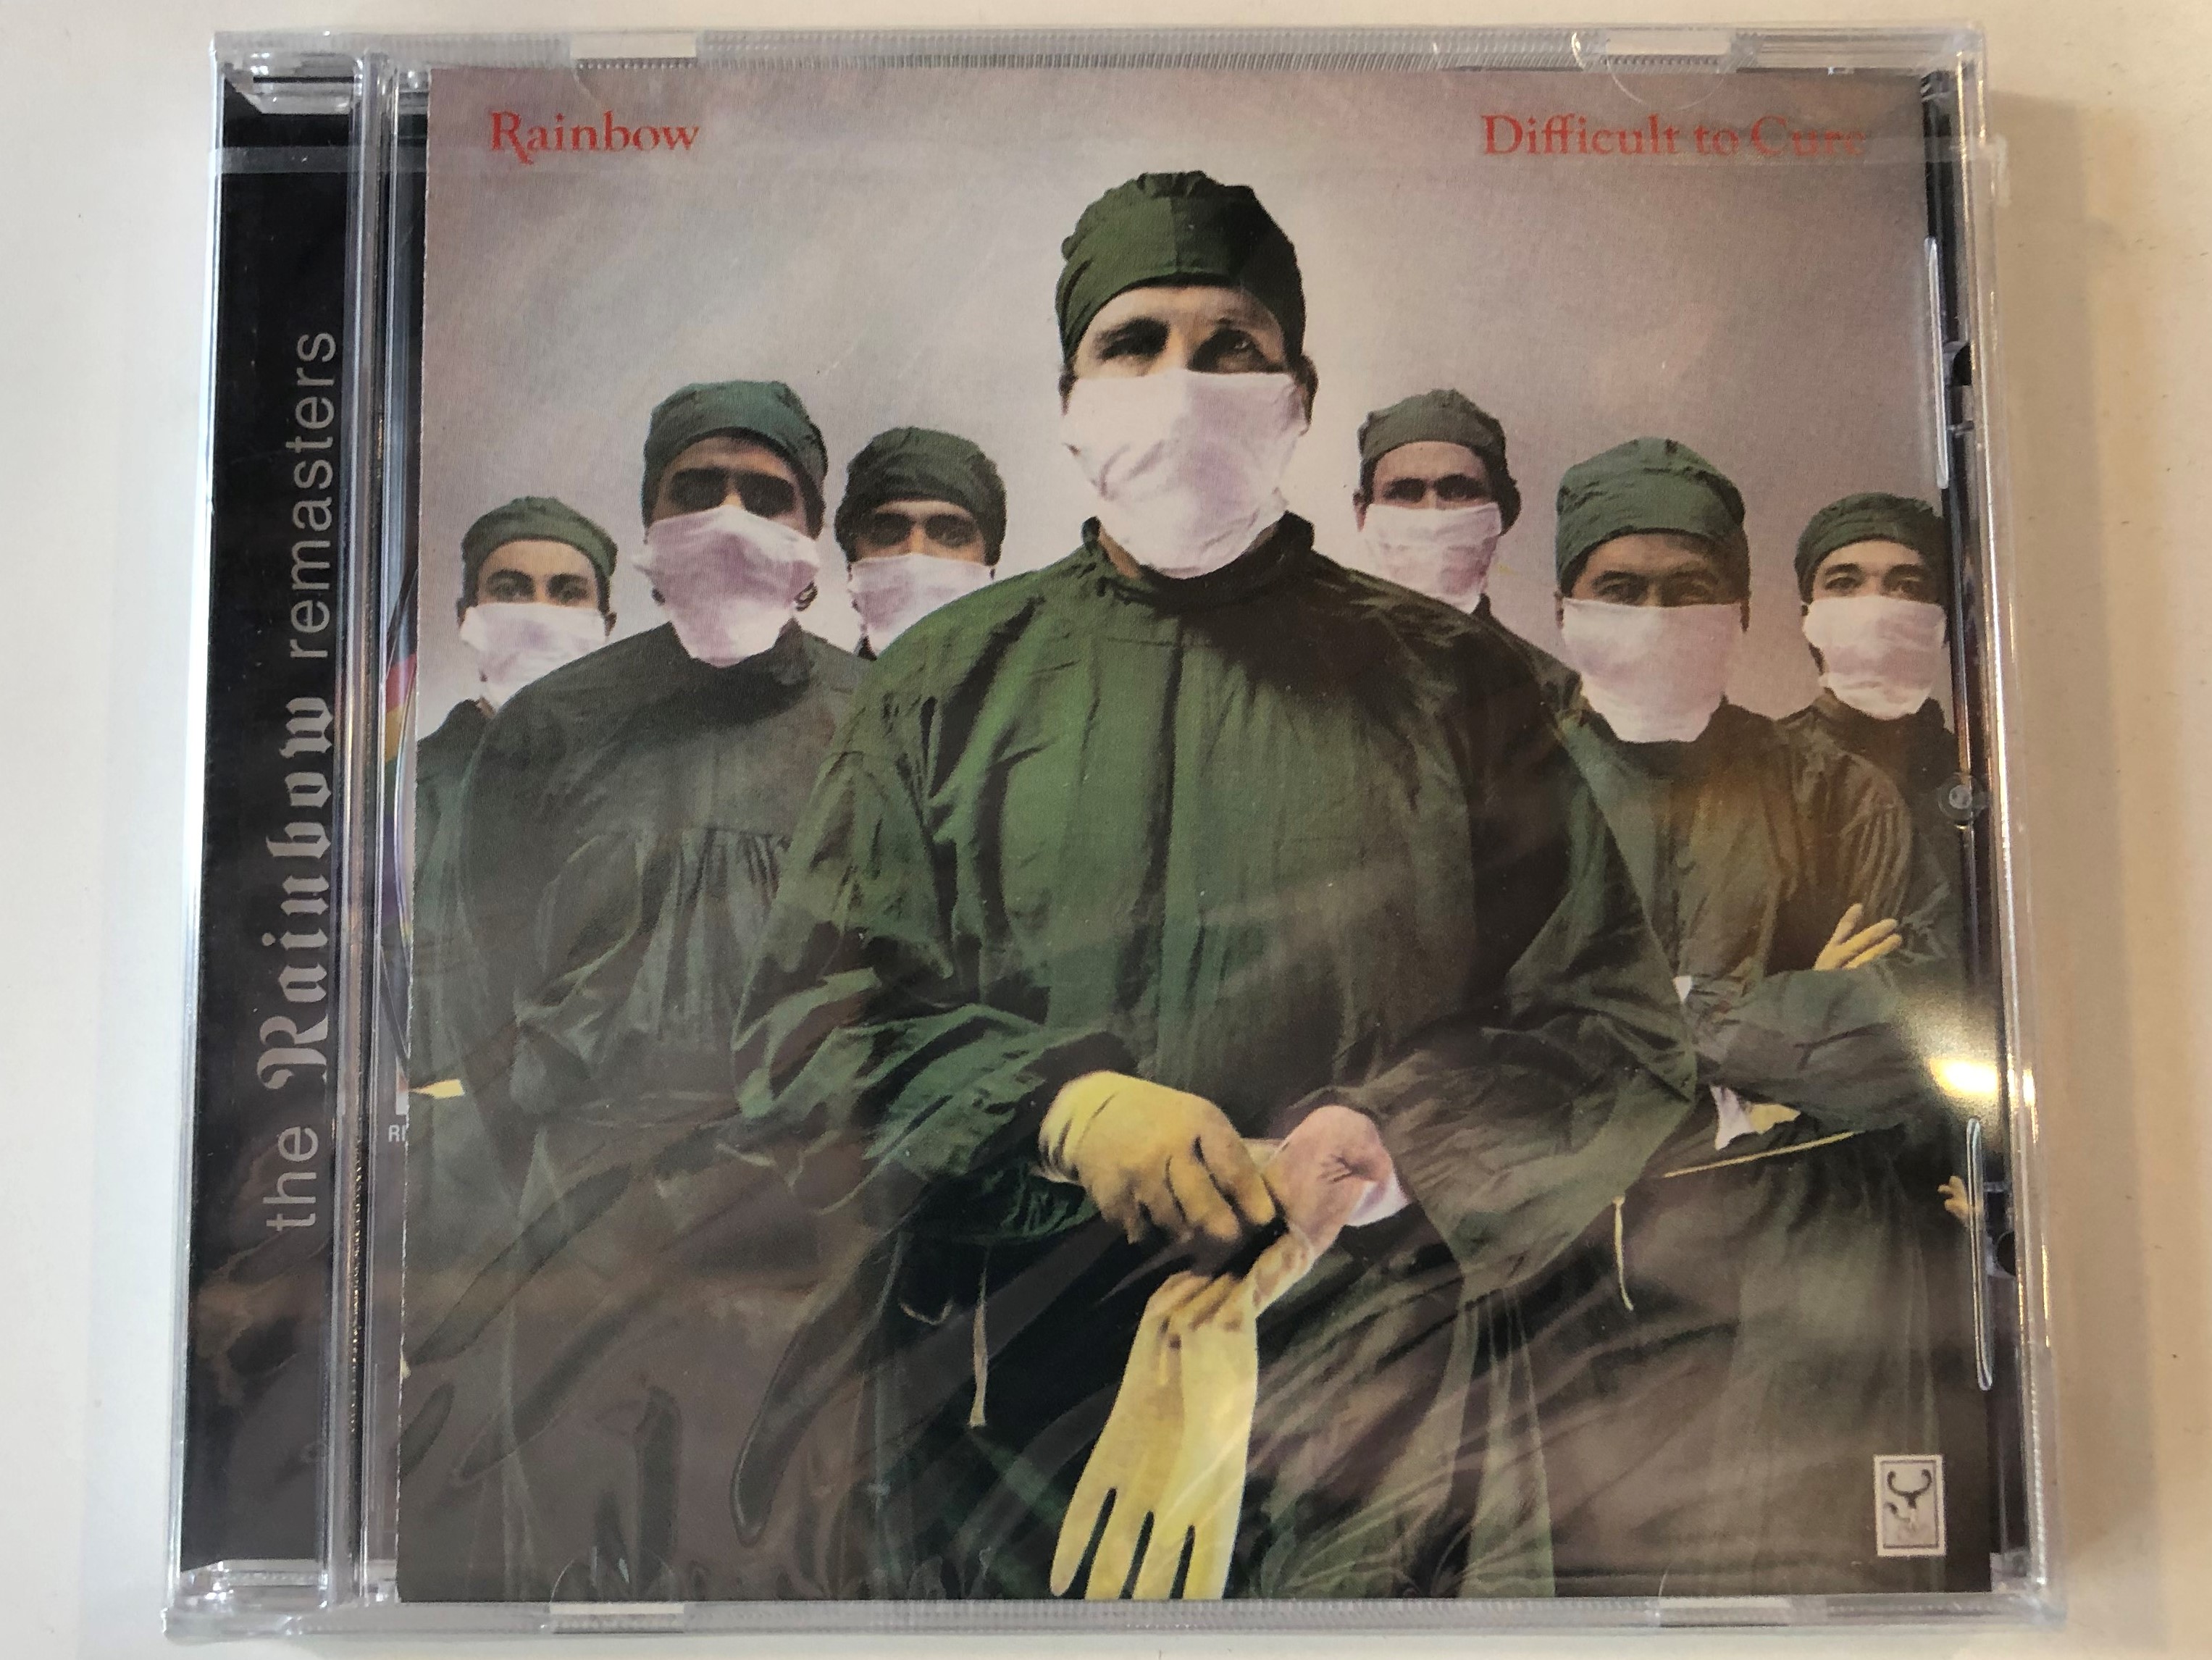 rainbow-difficult-to-cure-the-rainbow-remasters-polydor-audio-cd-1981-547-365-2-1-.jpg